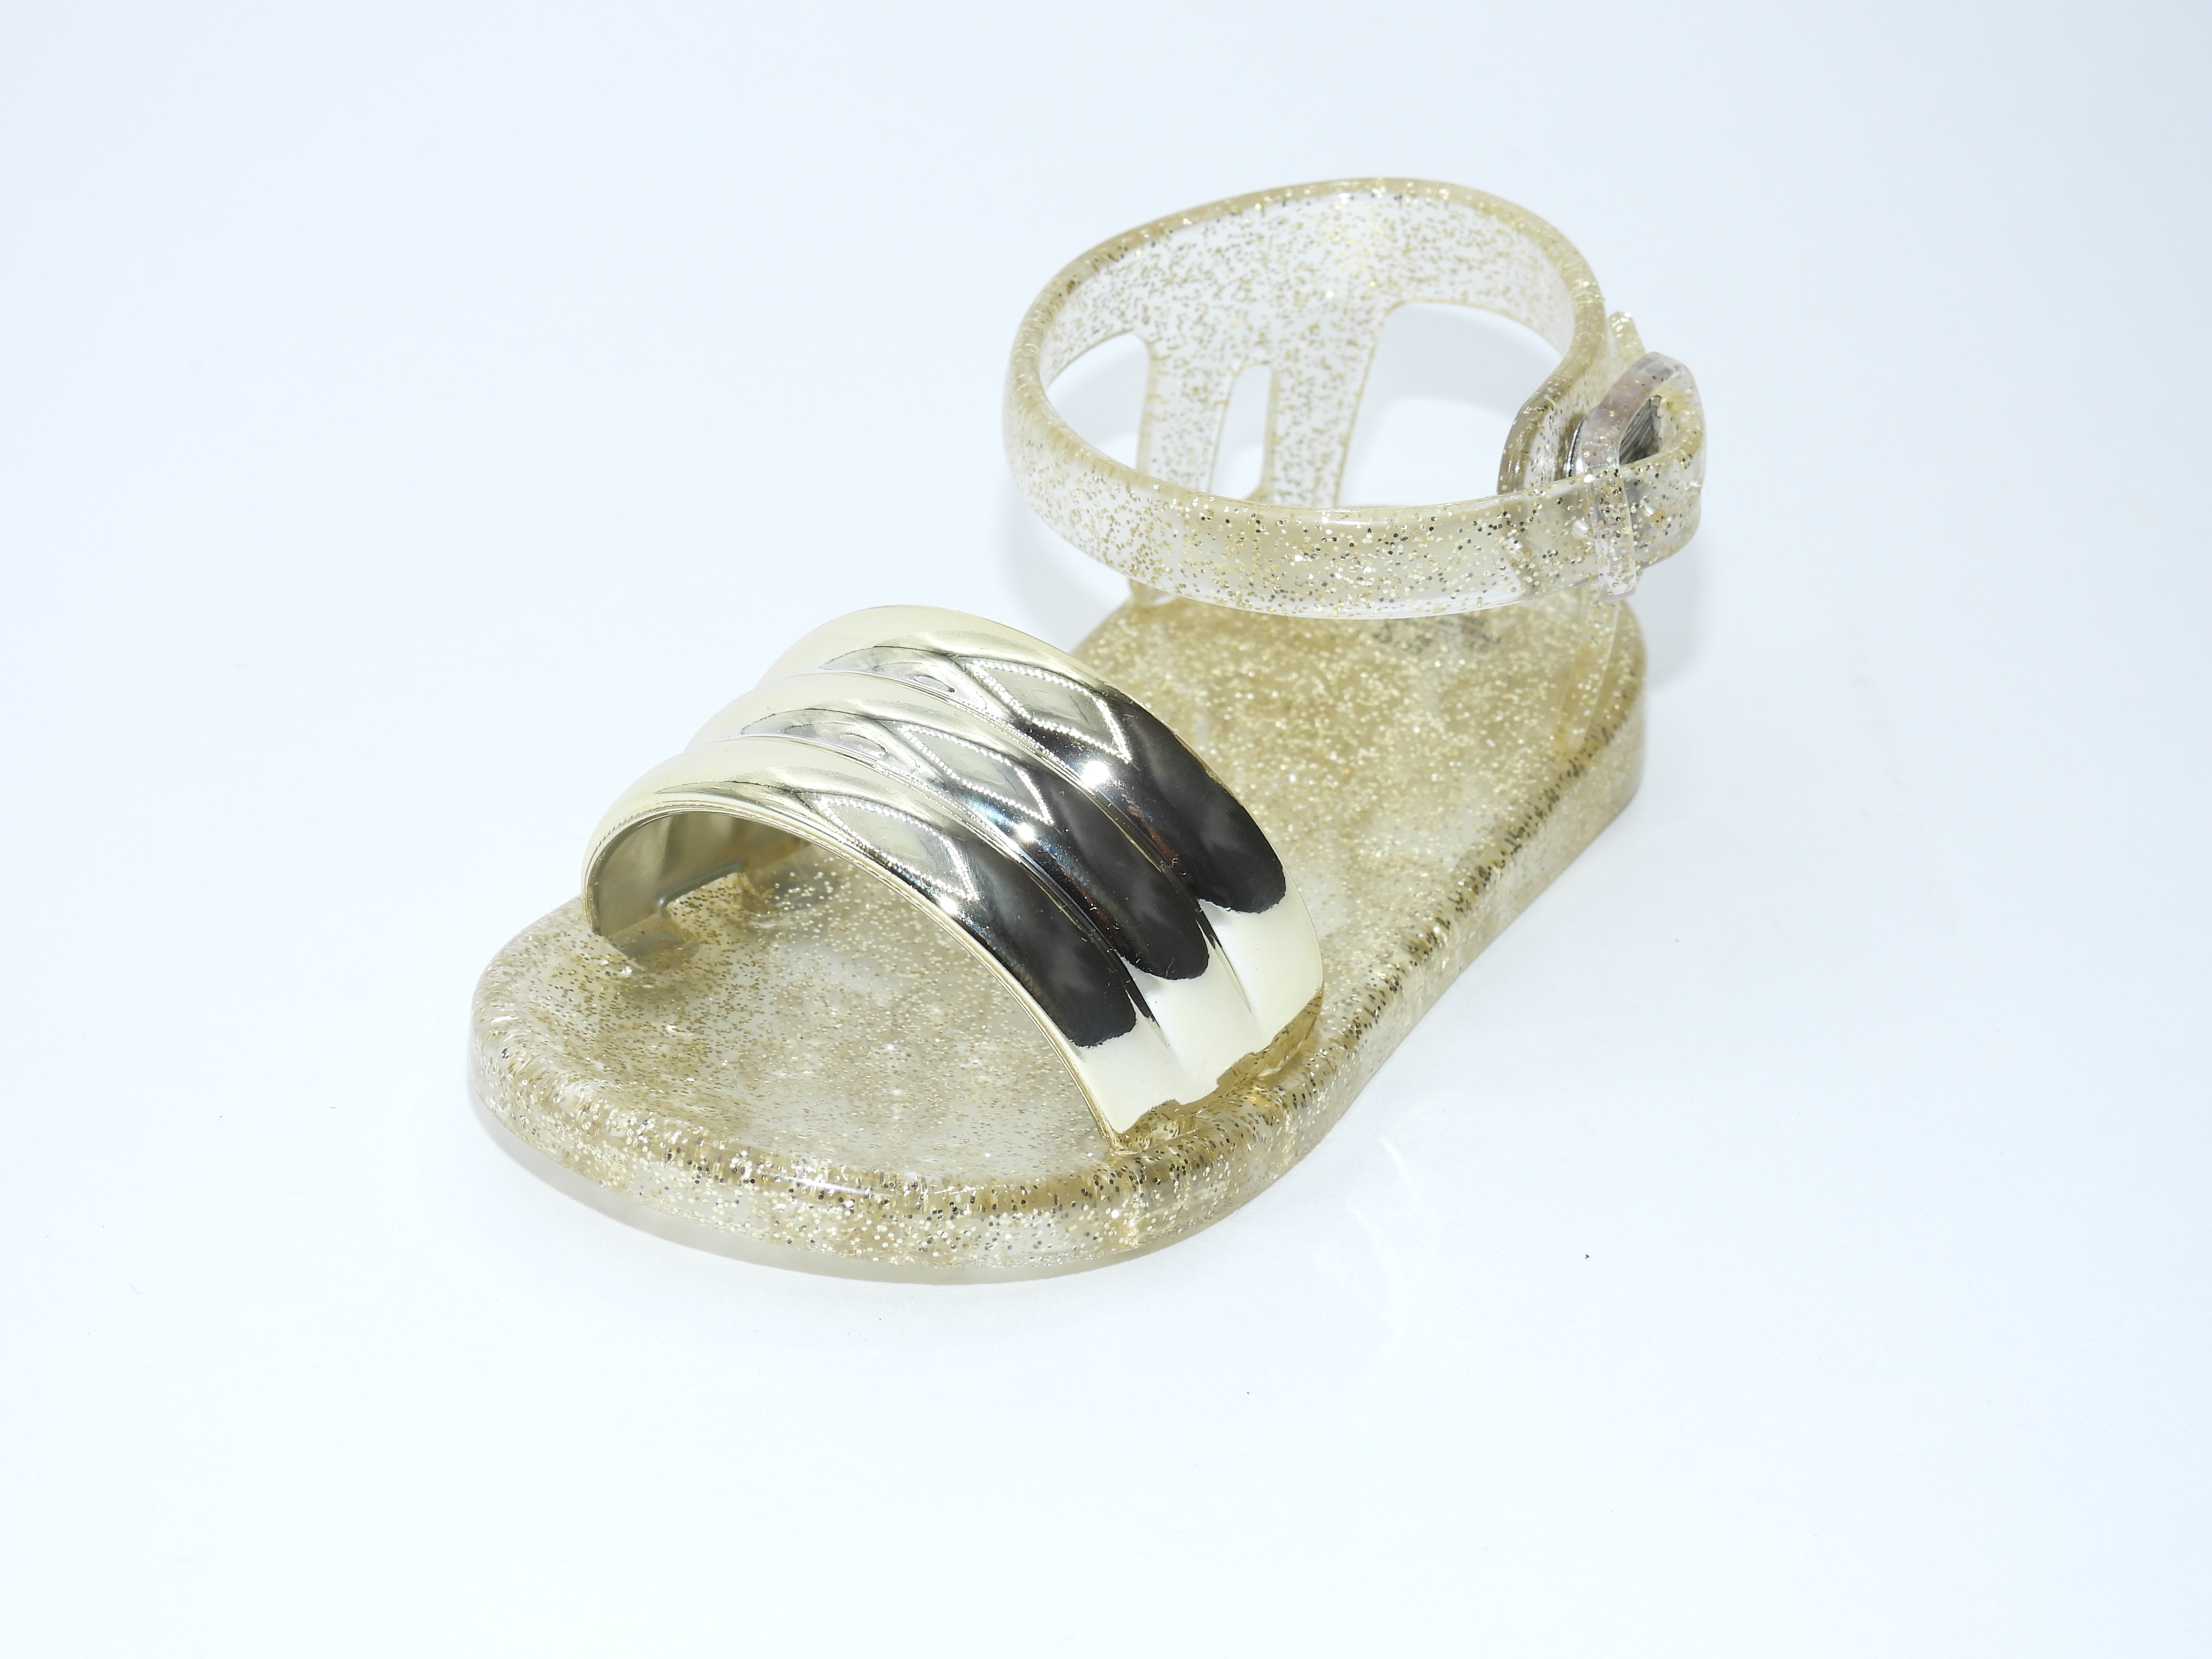 CHAMPAGNE GOLD JELLY SANDAL